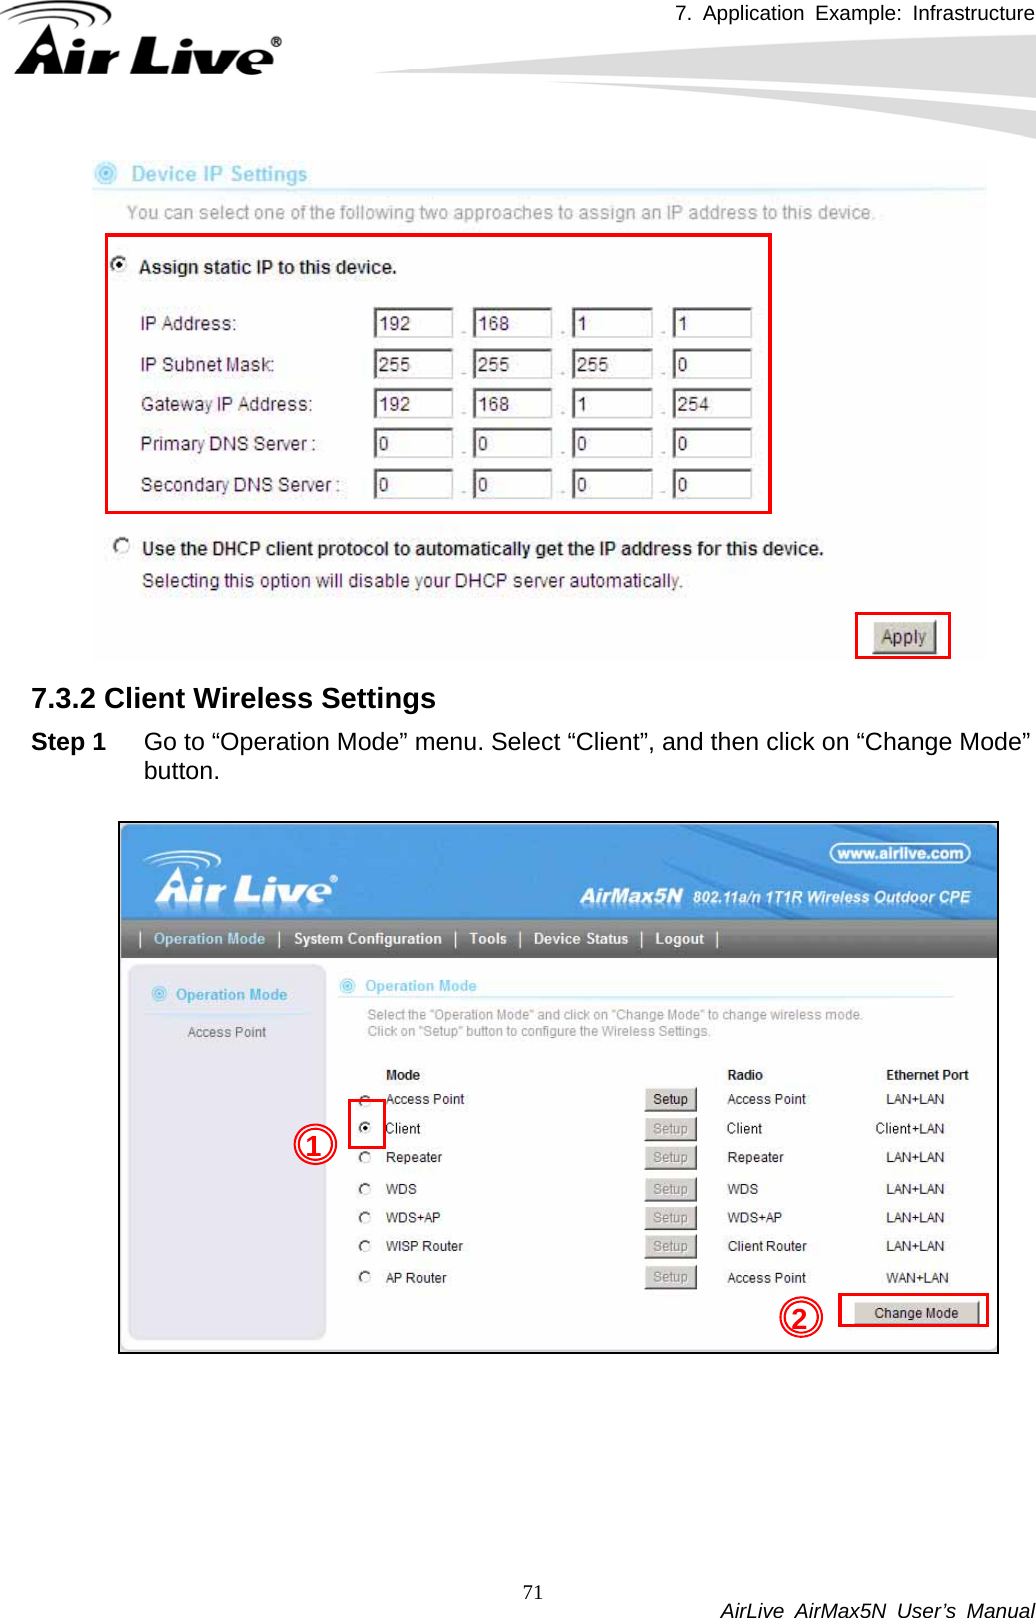 7. Application Example: Infrastructure           AirLive AirMax5N User’s Manual 71   7.3.2 Client Wireless Settings Step 1  Go to “Operation Mode” menu. Select “Client”, and then click on “Change Mode” button.   1 2      